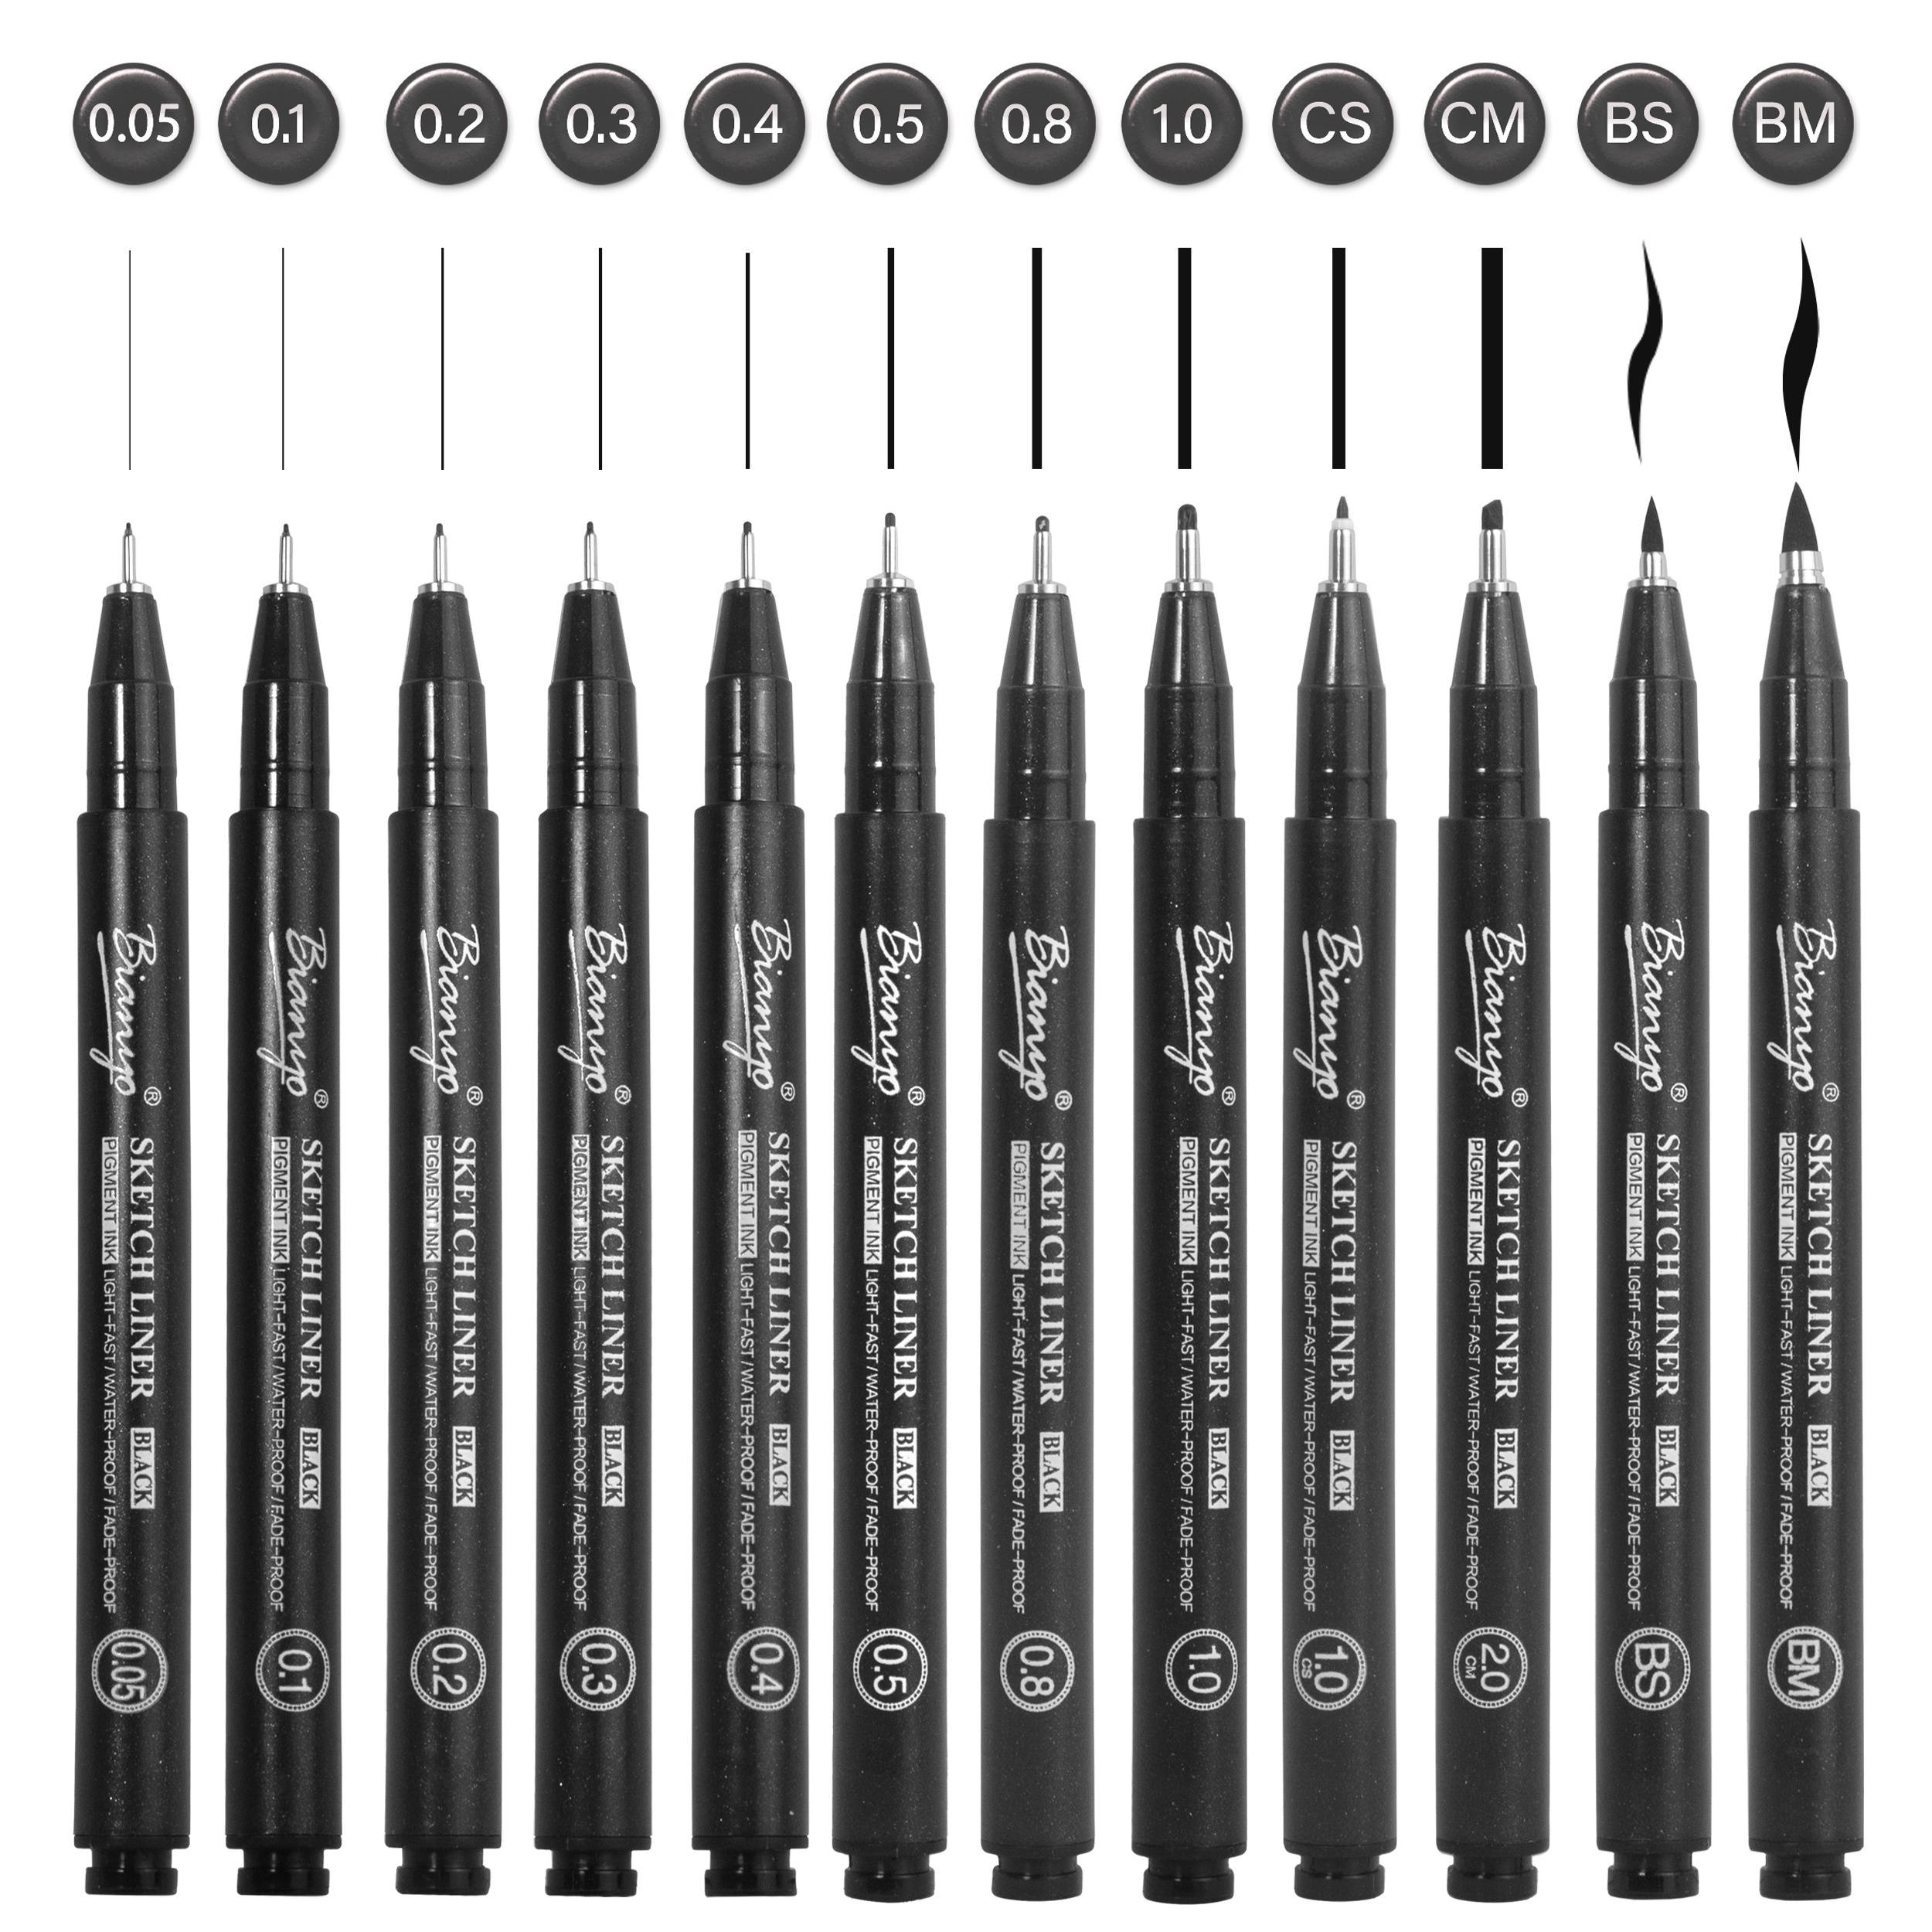 

Bianyo Black Micro Pen Set - 12 Assorted Sizes Fine Line Drawing, Upgraded Pigment Ink, Bonus Pouch Bag, Water-resistant Archival Pens For Artists, Crafters, And Journaling